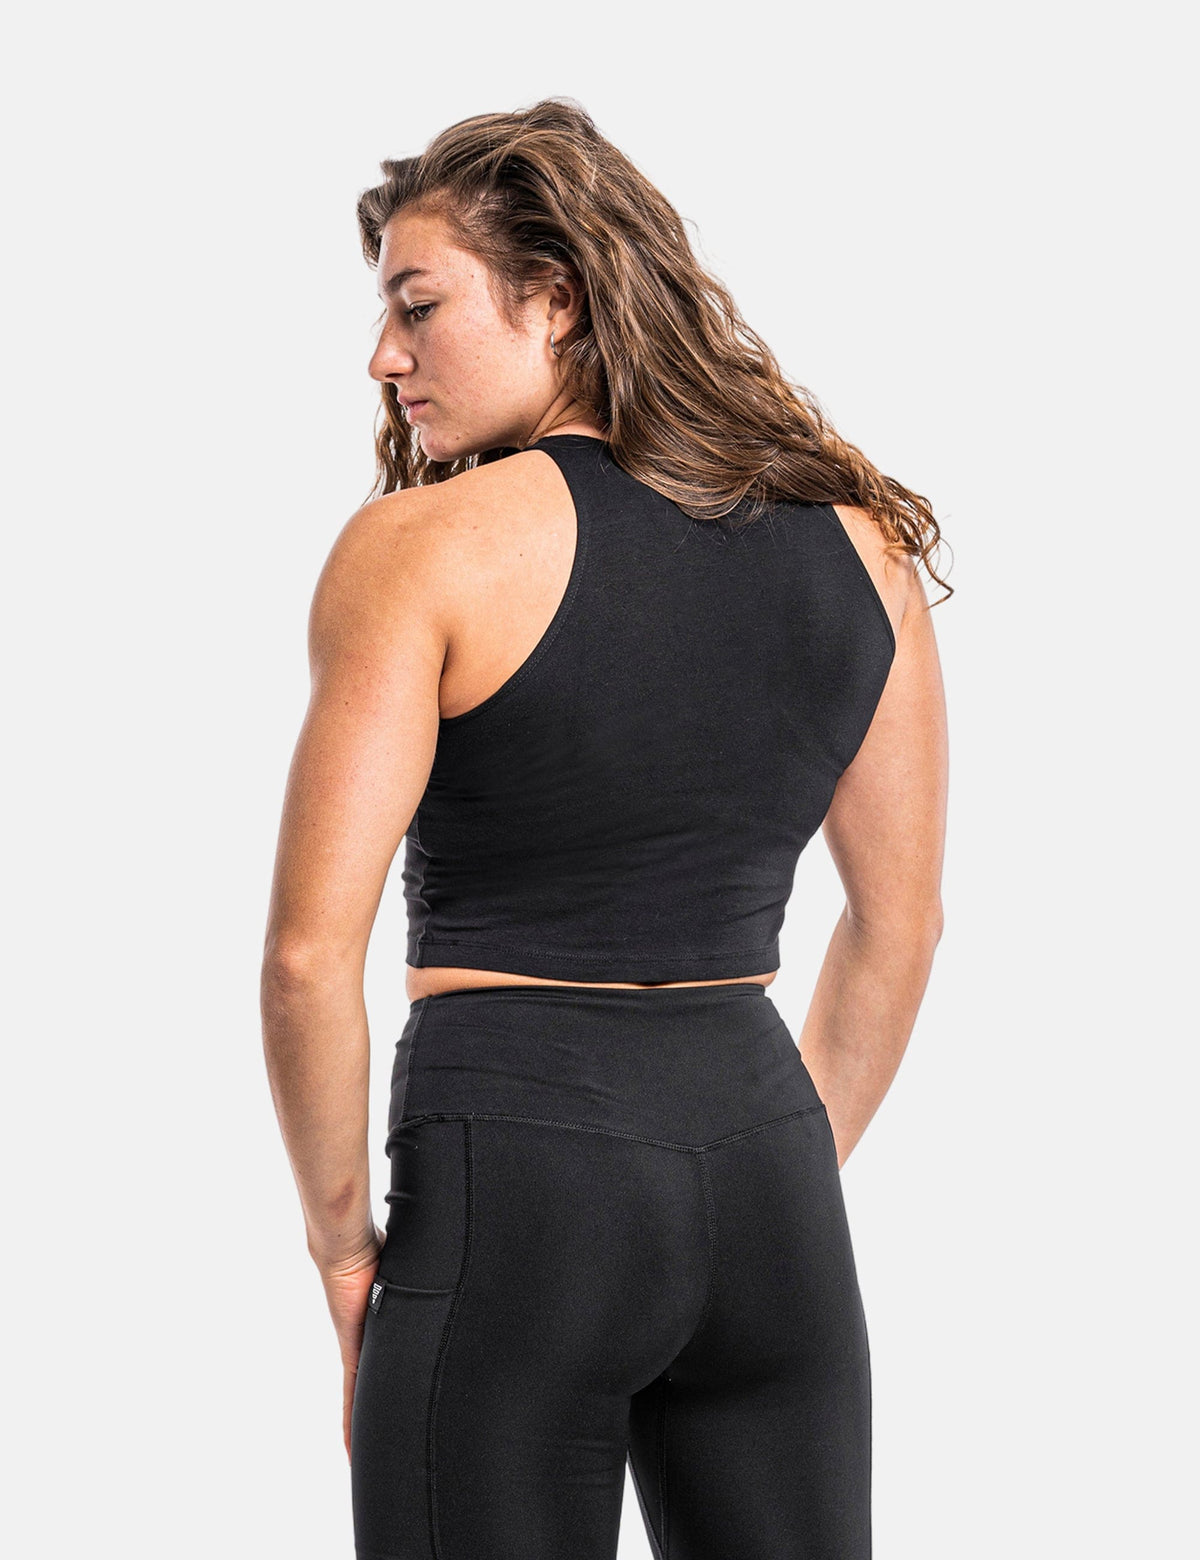 Back View of black Street Workout Crop Top for female calisthenics athletes.